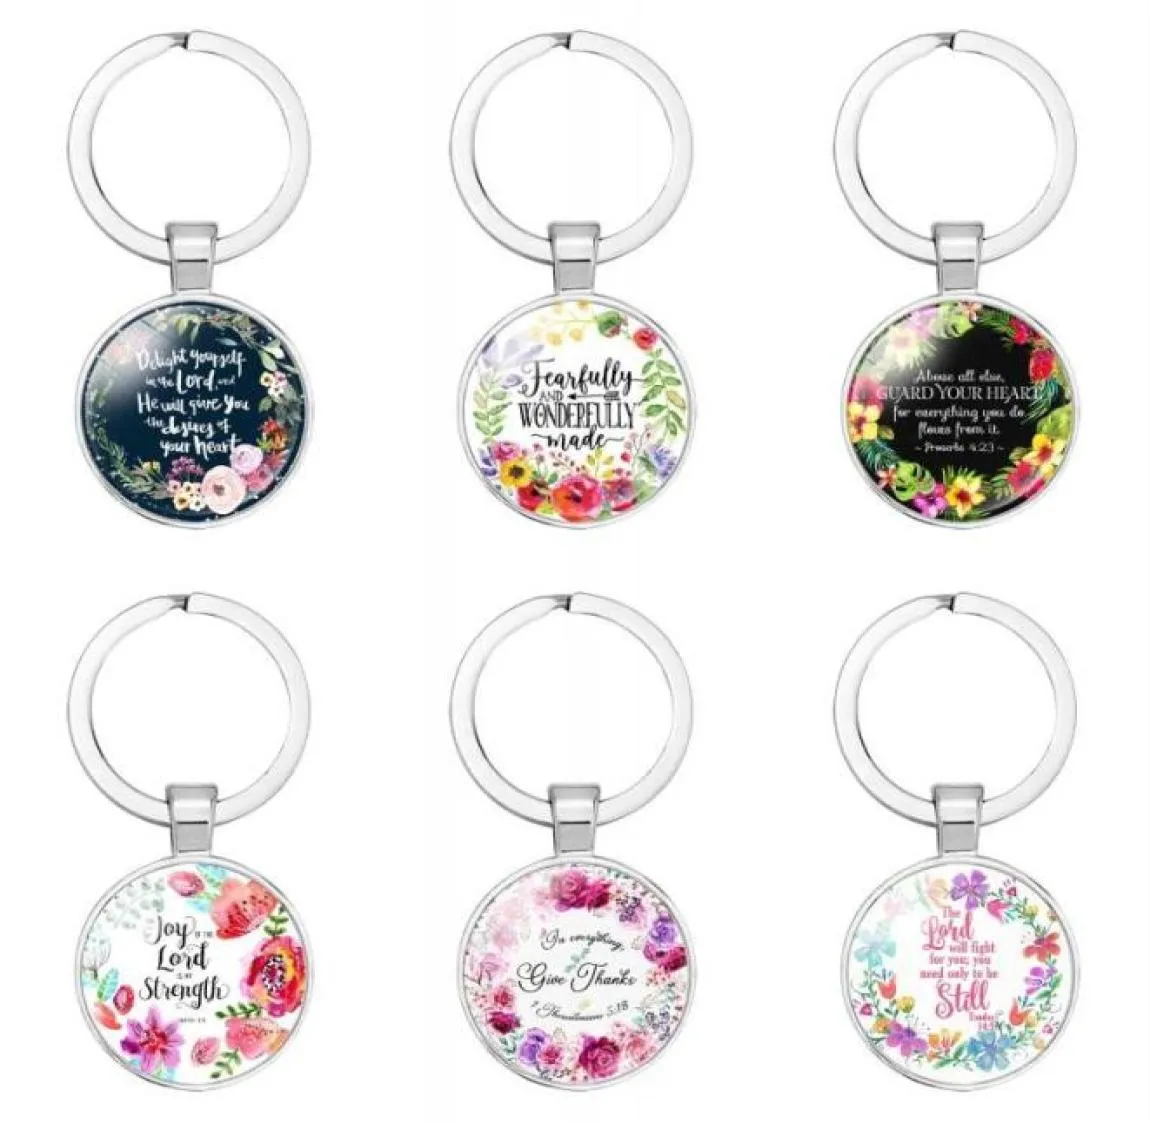 2020 17 Styles Bible Verse Key Chain Women Men Keyrings Keychains Car Key Holder Scripture Quote Faith Jewelry Gift Keyf8662543